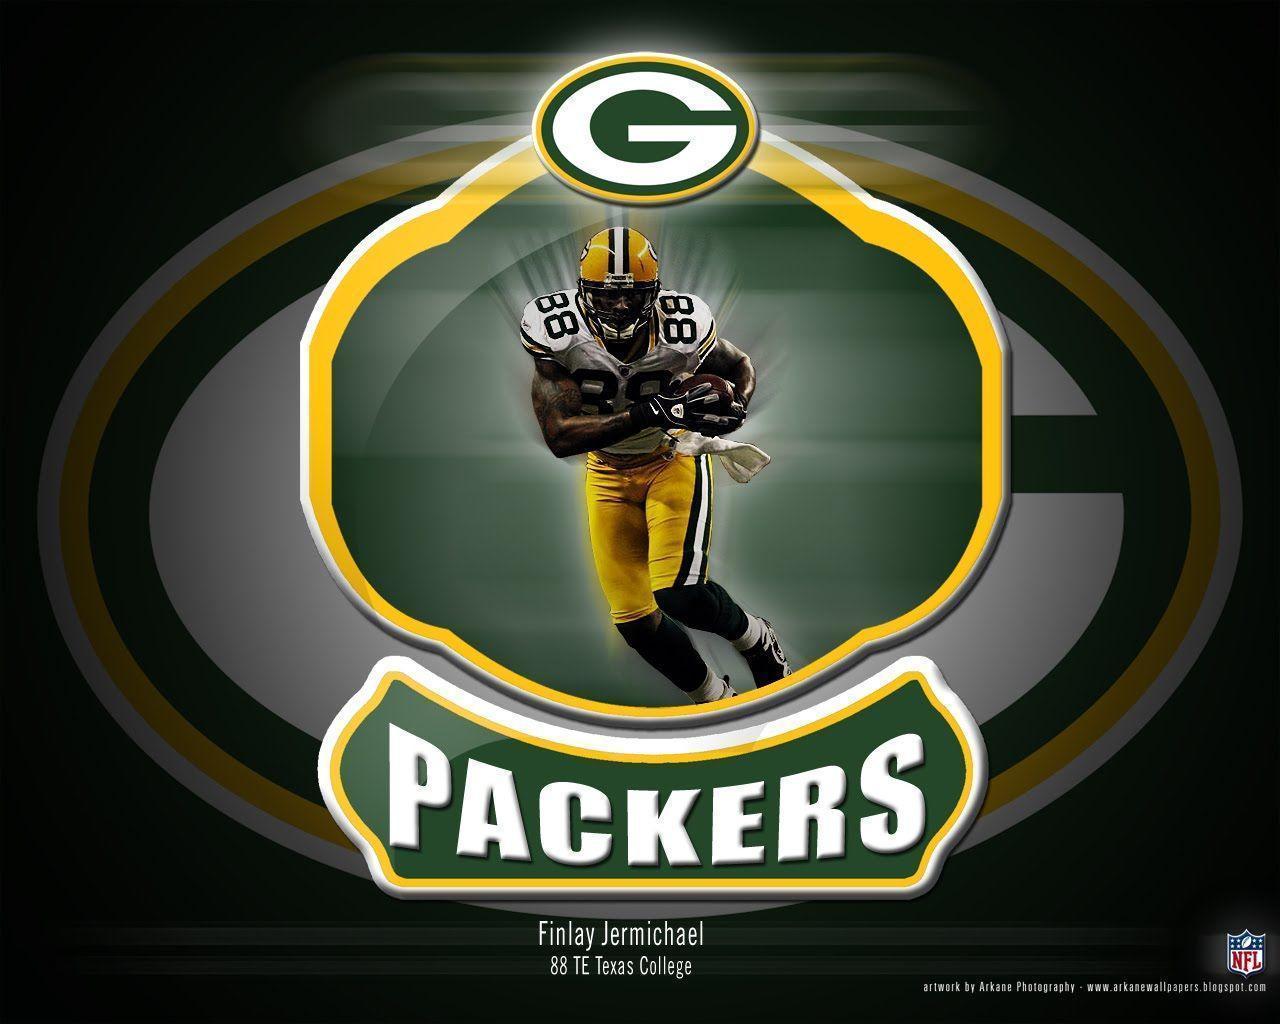 best image about GREENBAY PACKERS. Desktop